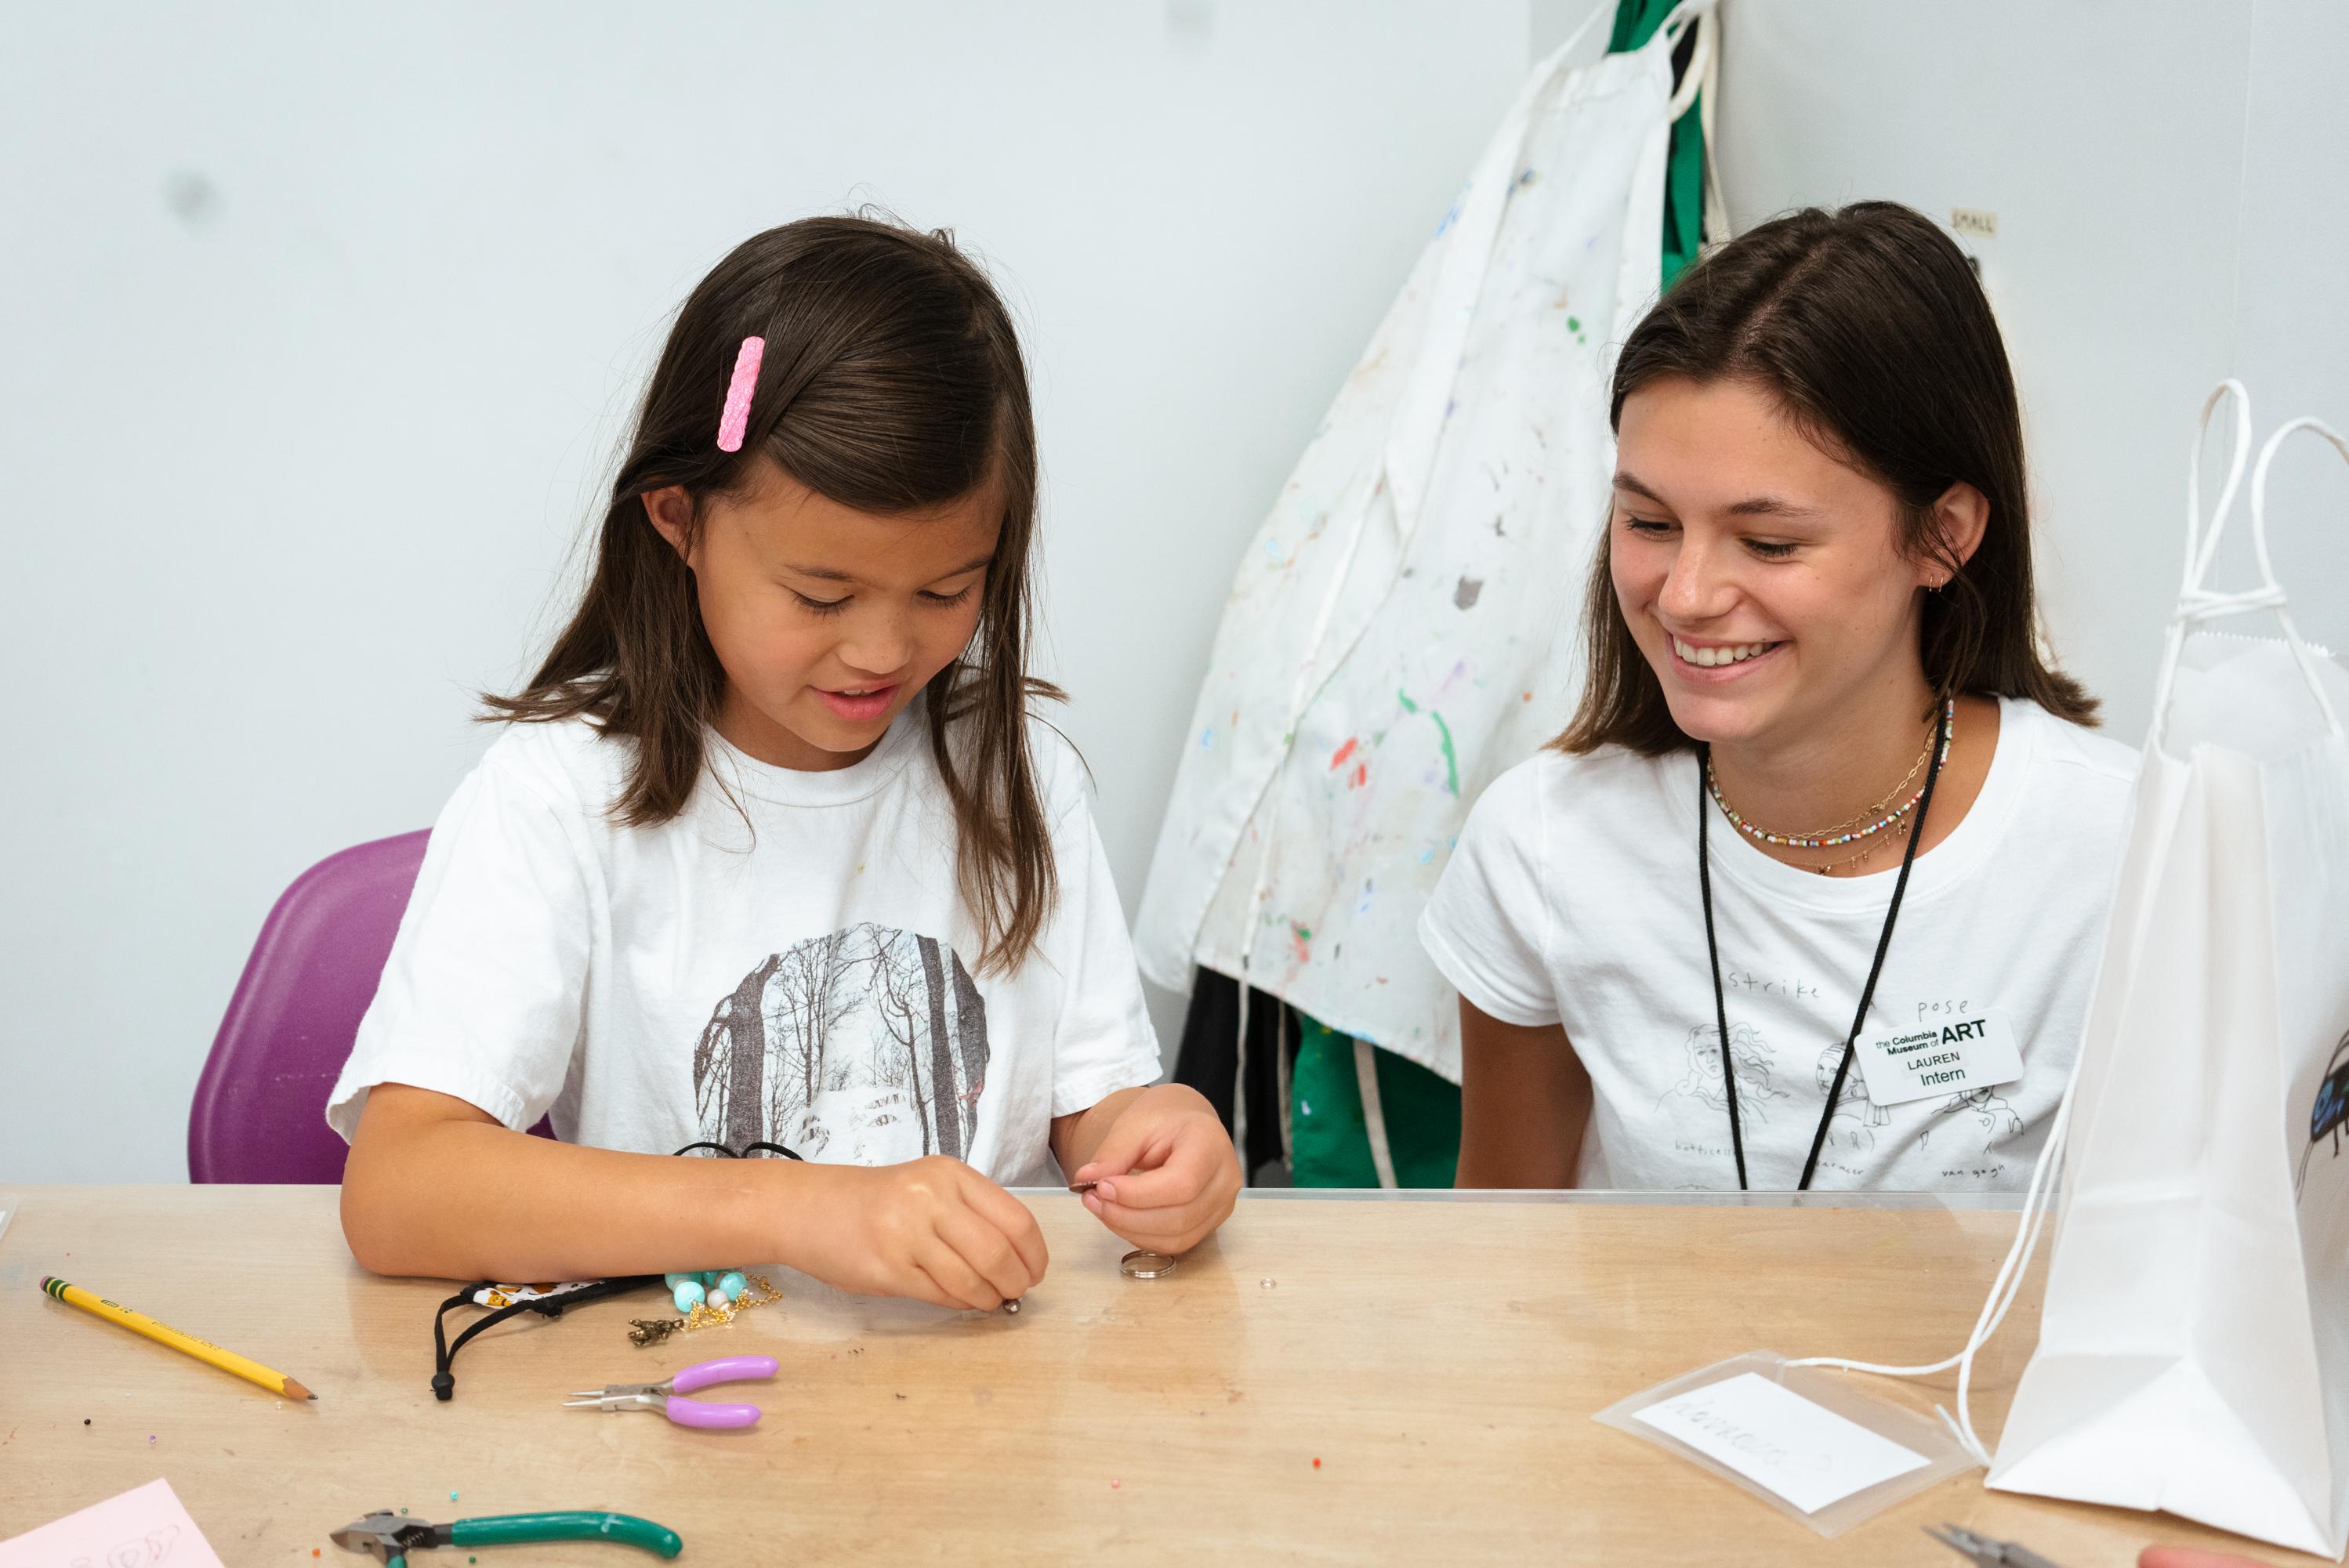 a young girl builds jewelry as an instructor encourages her